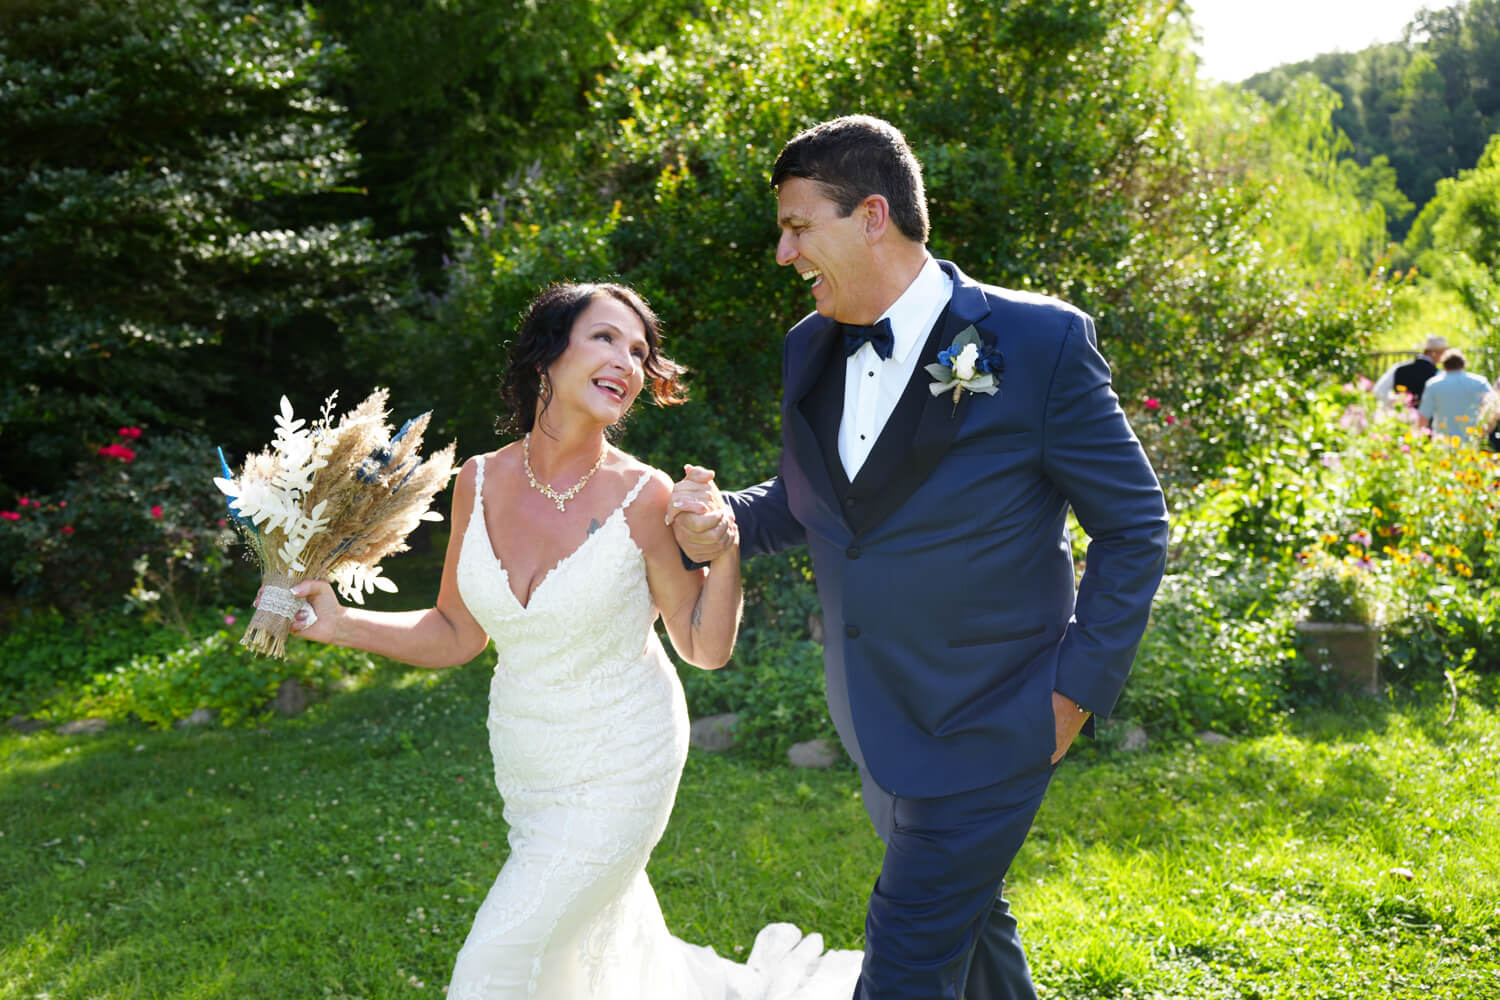 Bride and Groom walking from their ceremony site holding hands and laughing with joy